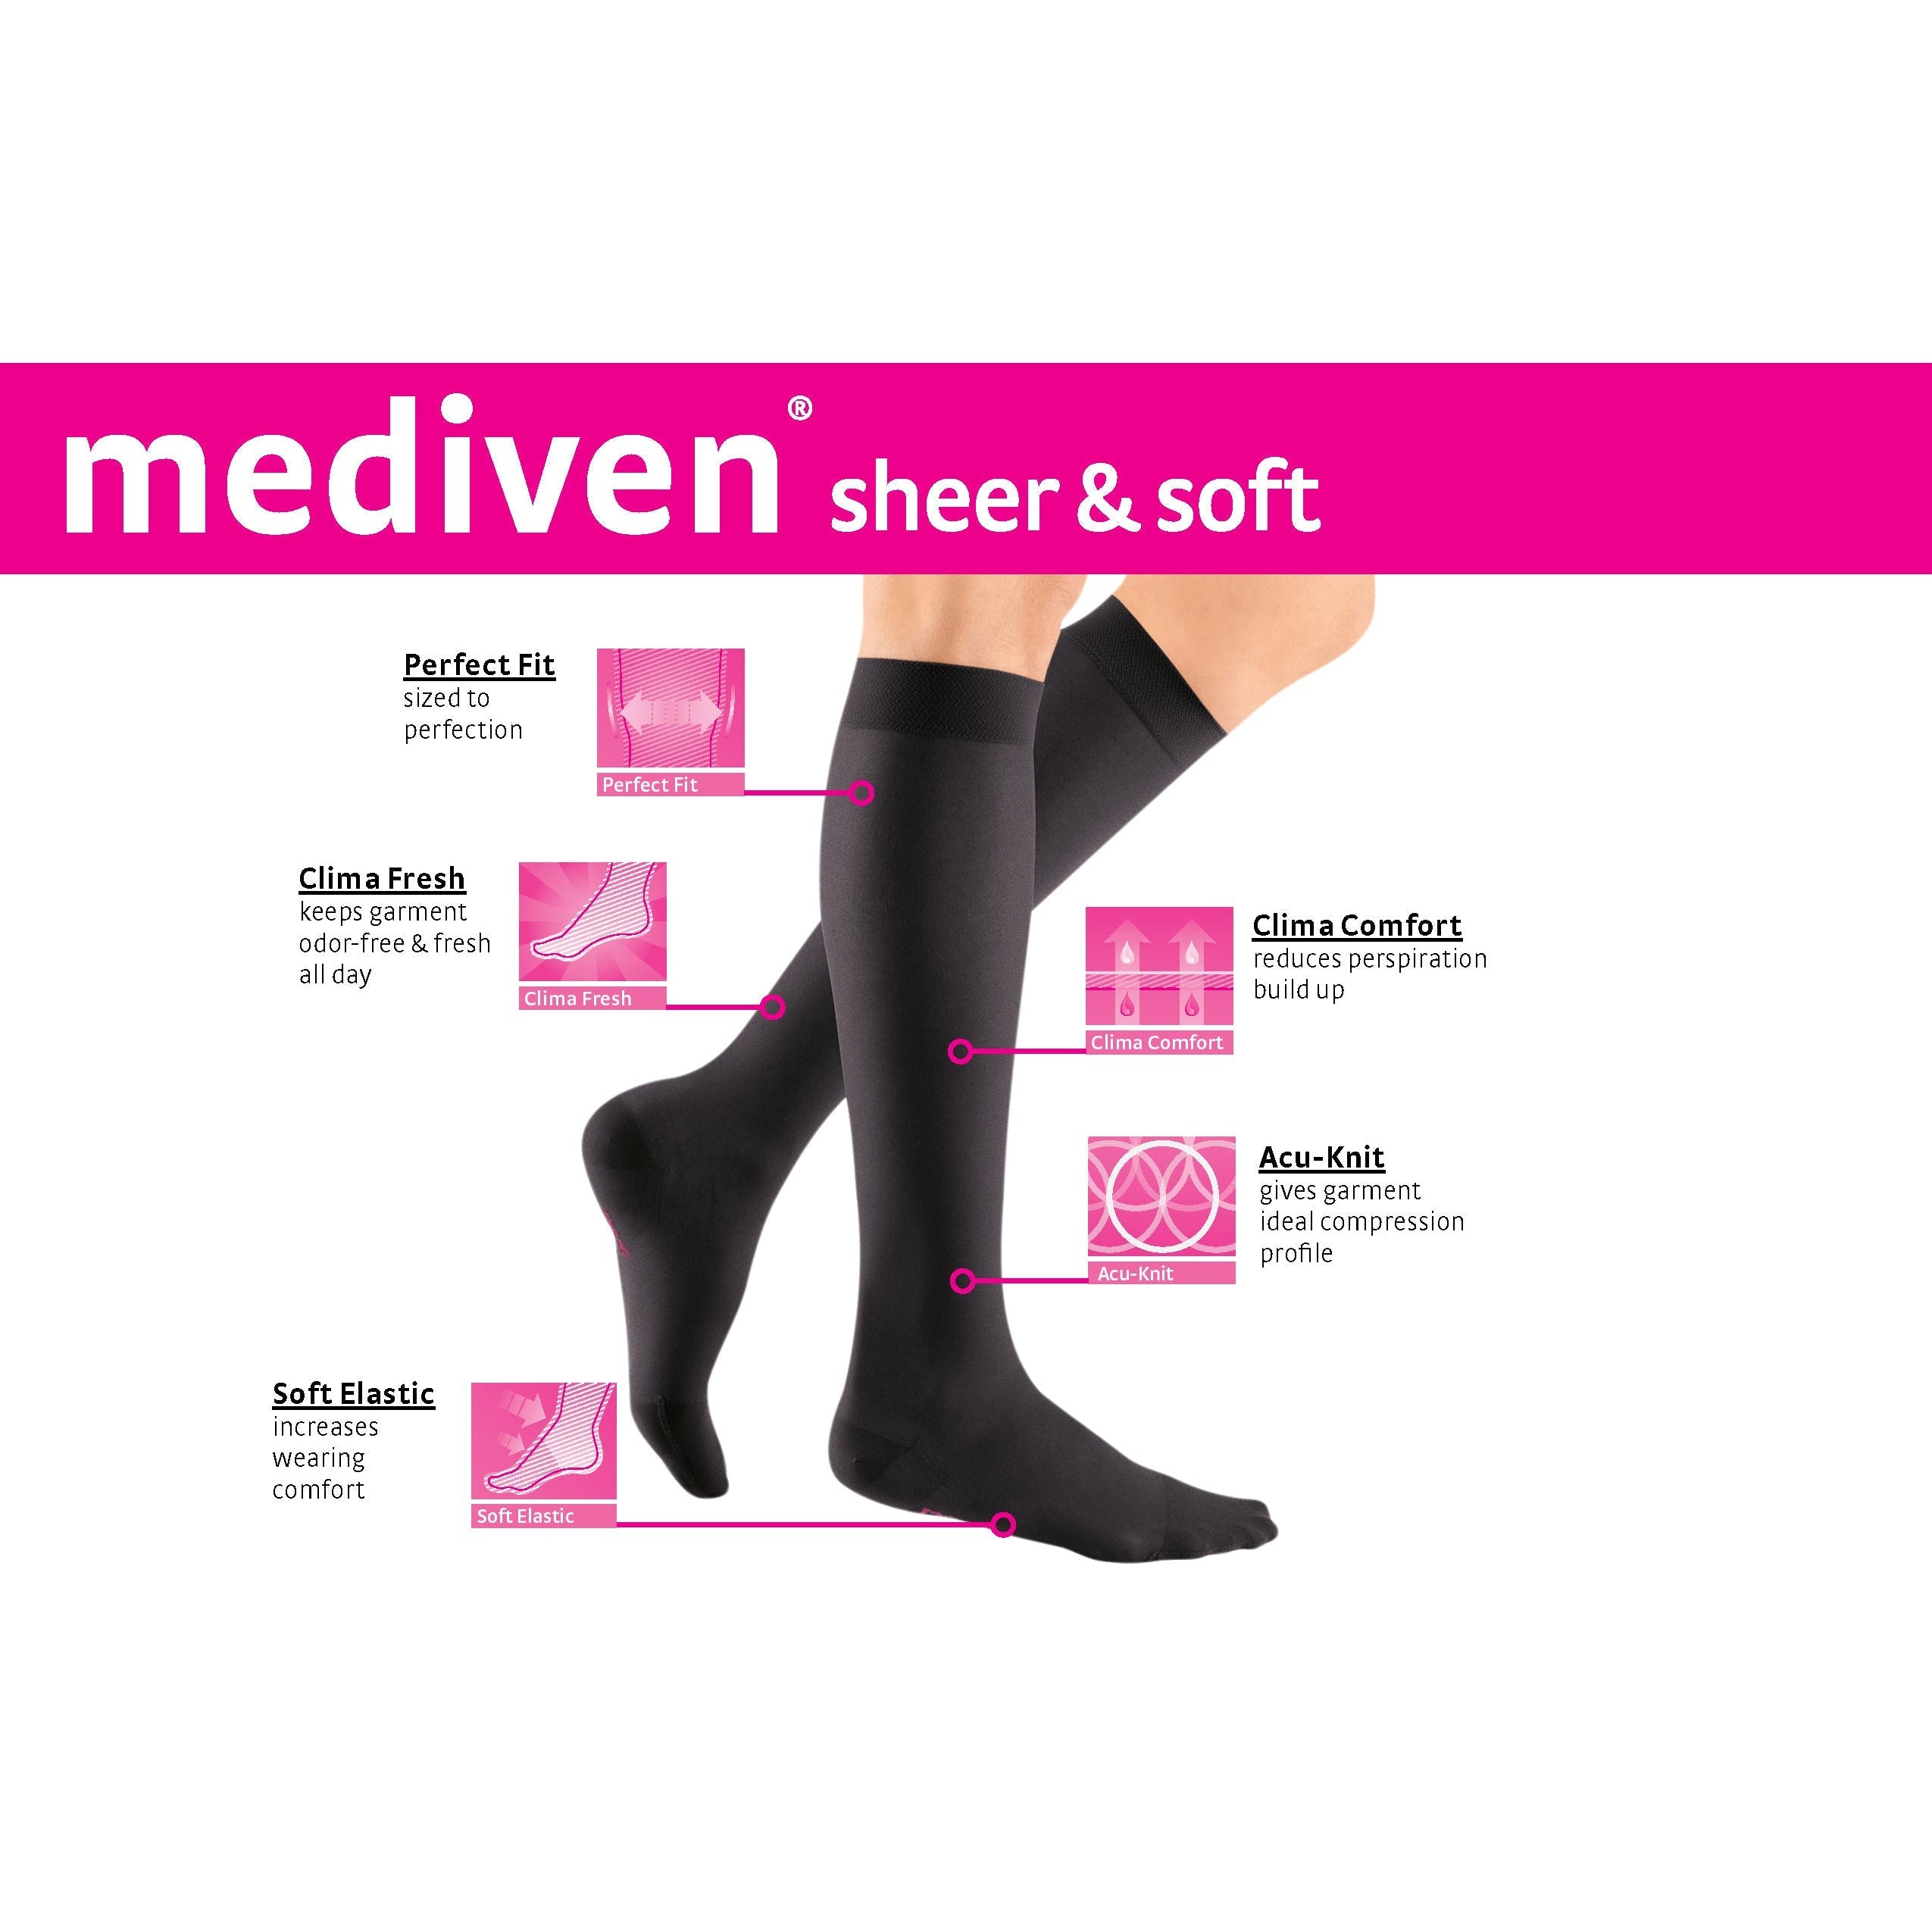 mediven sheer & soft, 15-20 mmHg, Panty, Open Toe – The Medical Zone